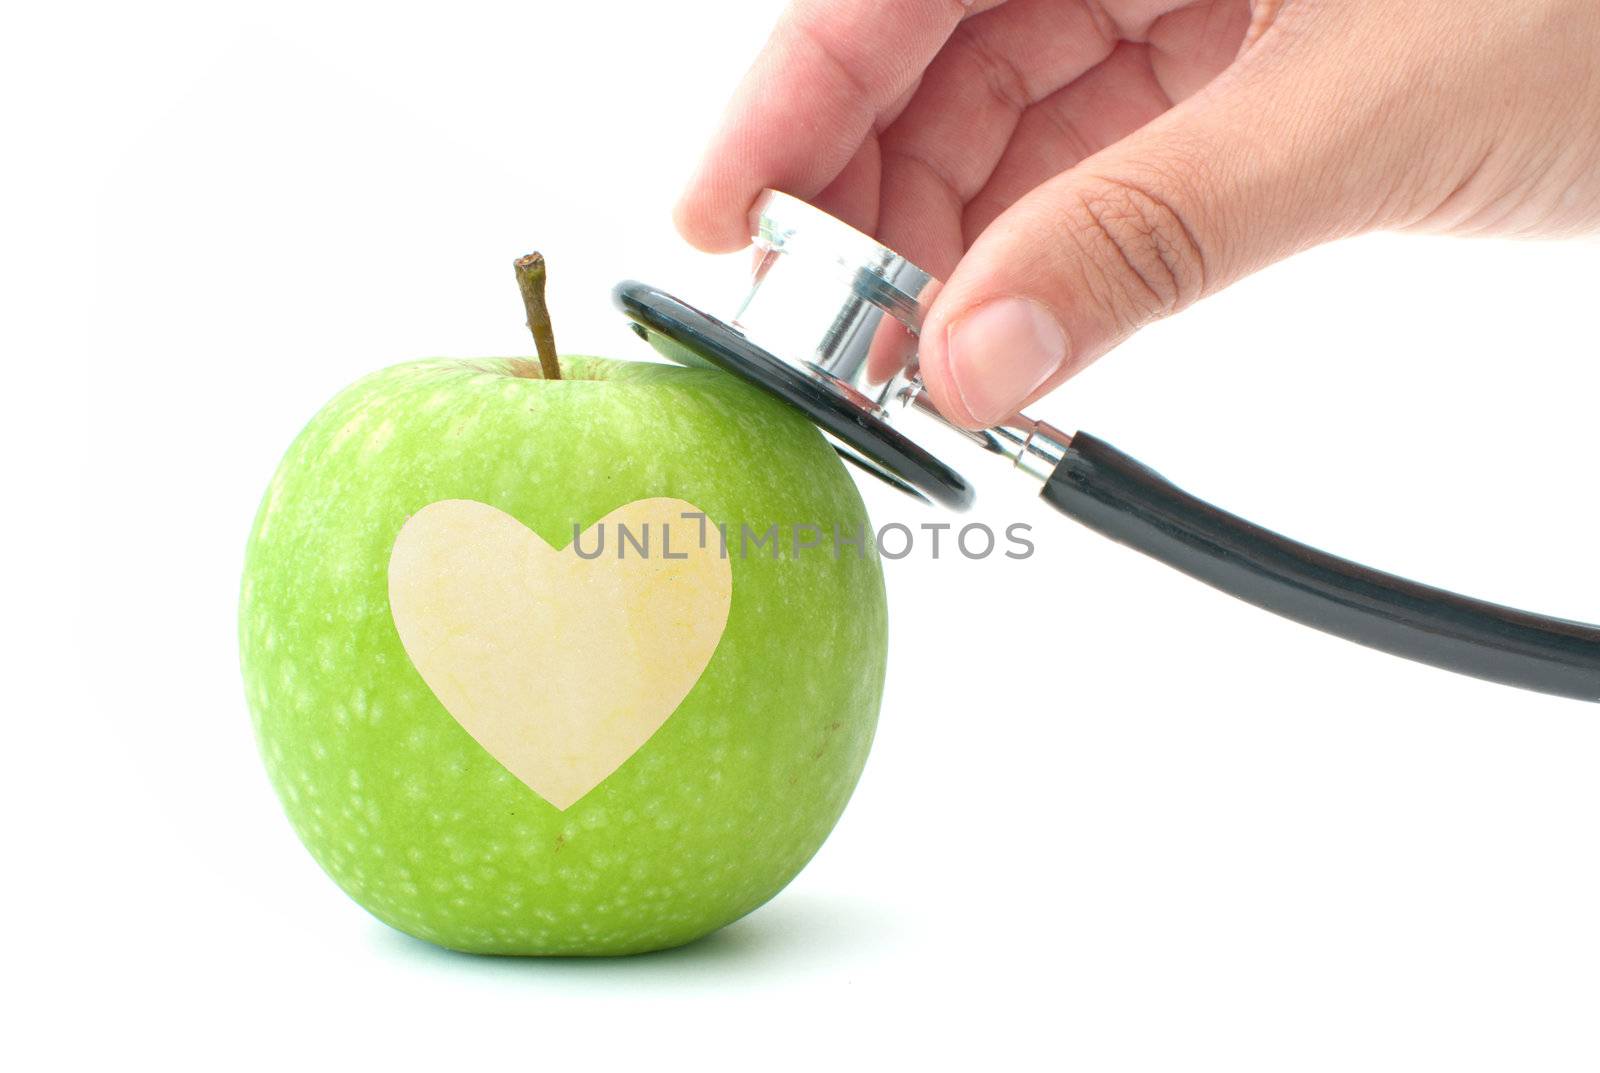 Stethoscope and heart apple by unikpix